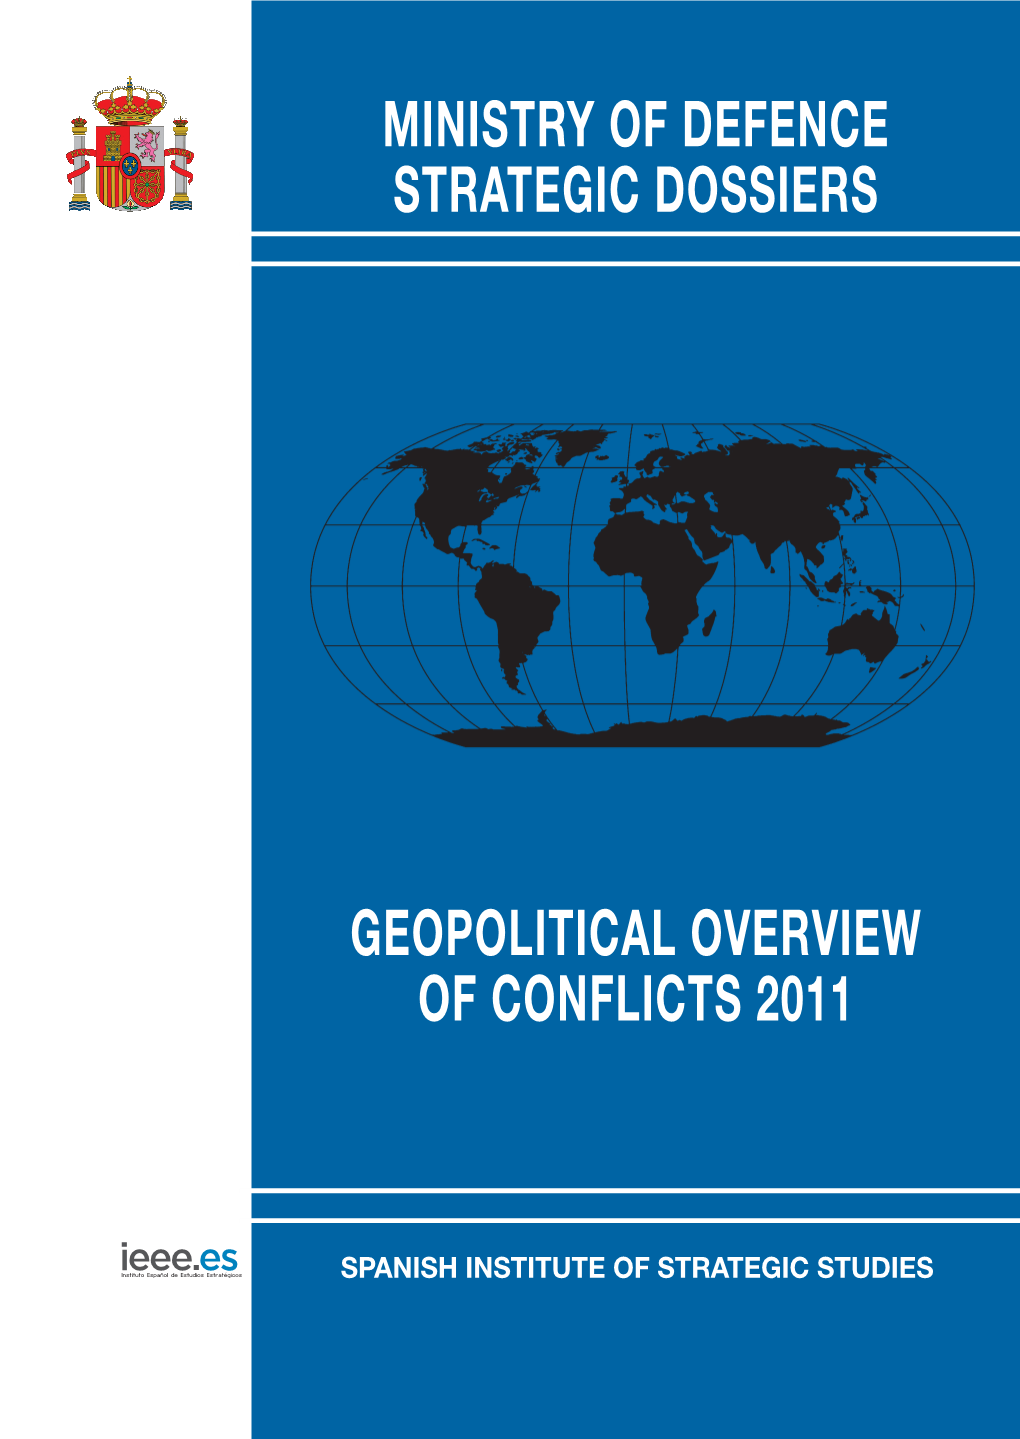 Geopolitical Overview of Conflicts 2011 of Conflicts 2011